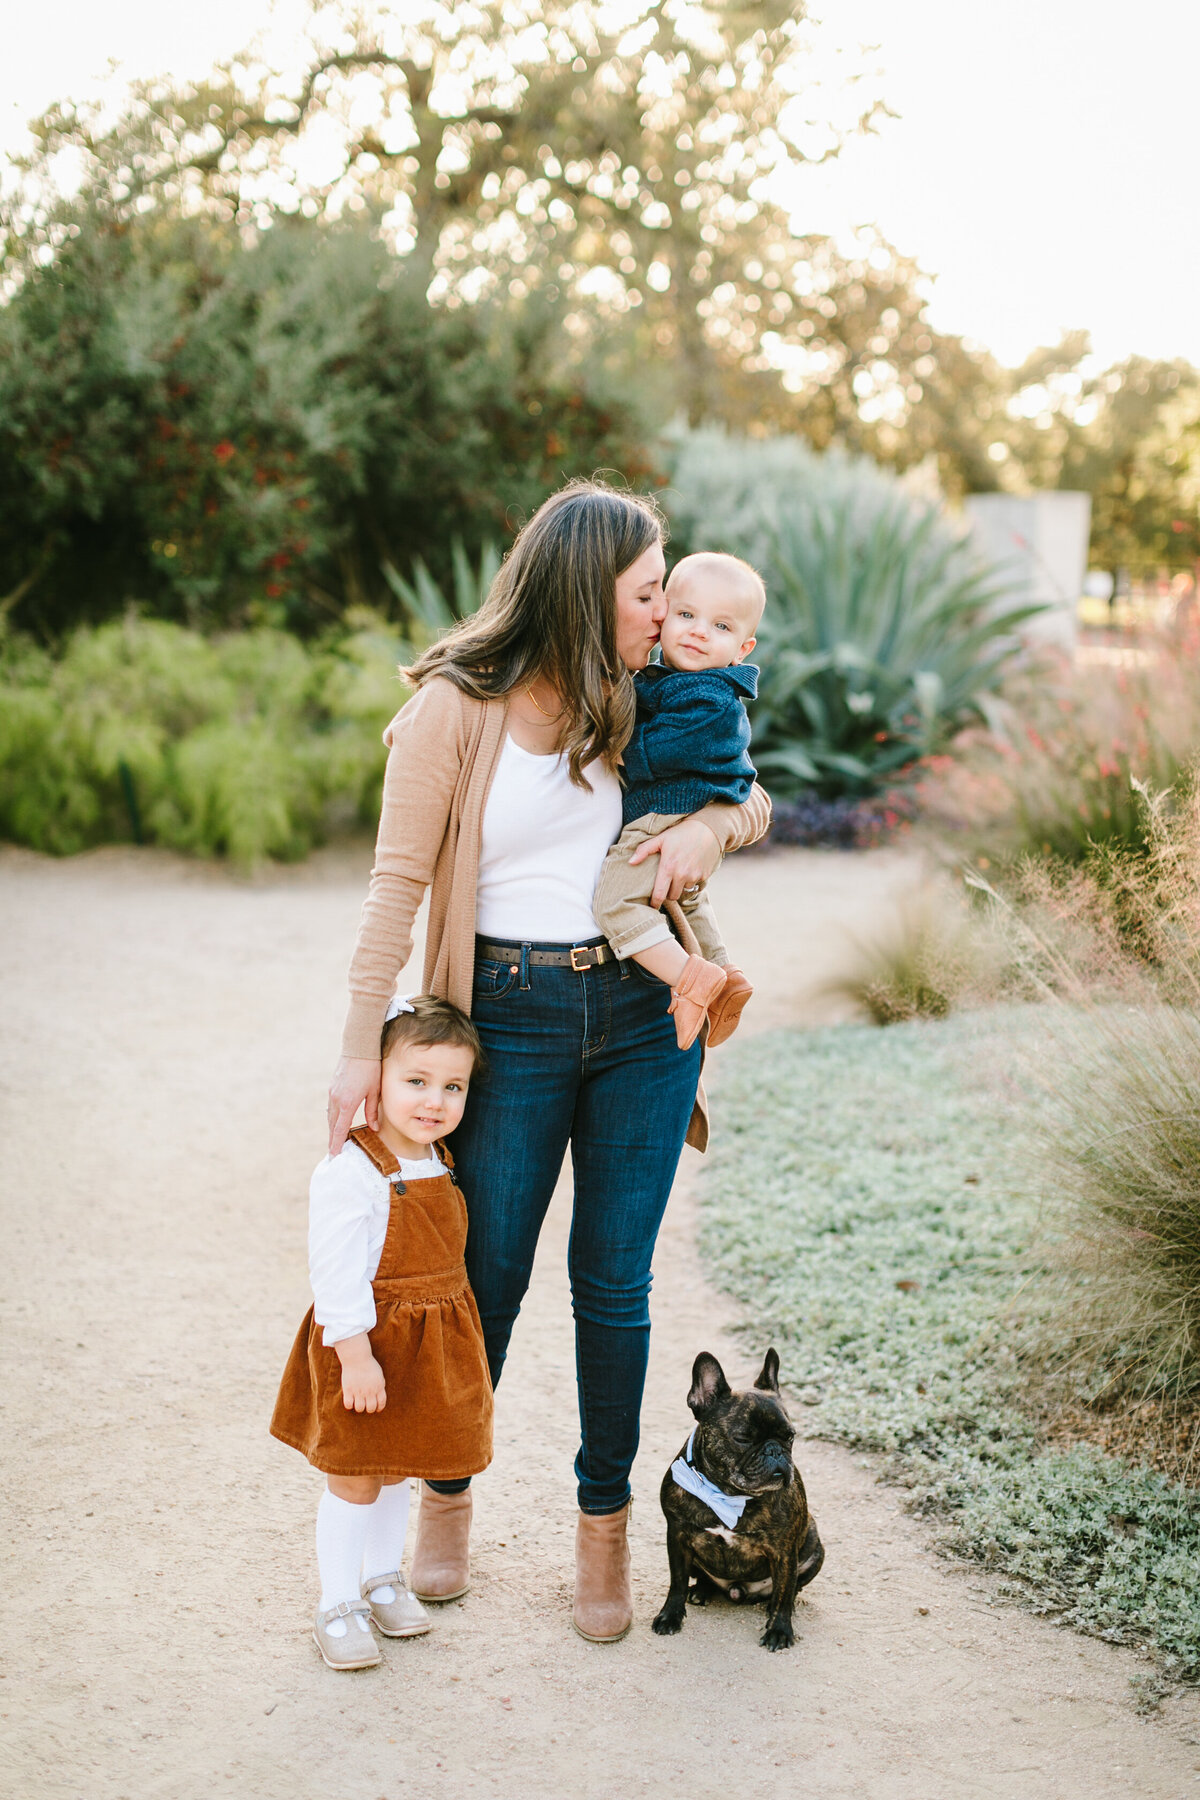 Best California and Texas Family Photographer-Jodee Debes Photography-217